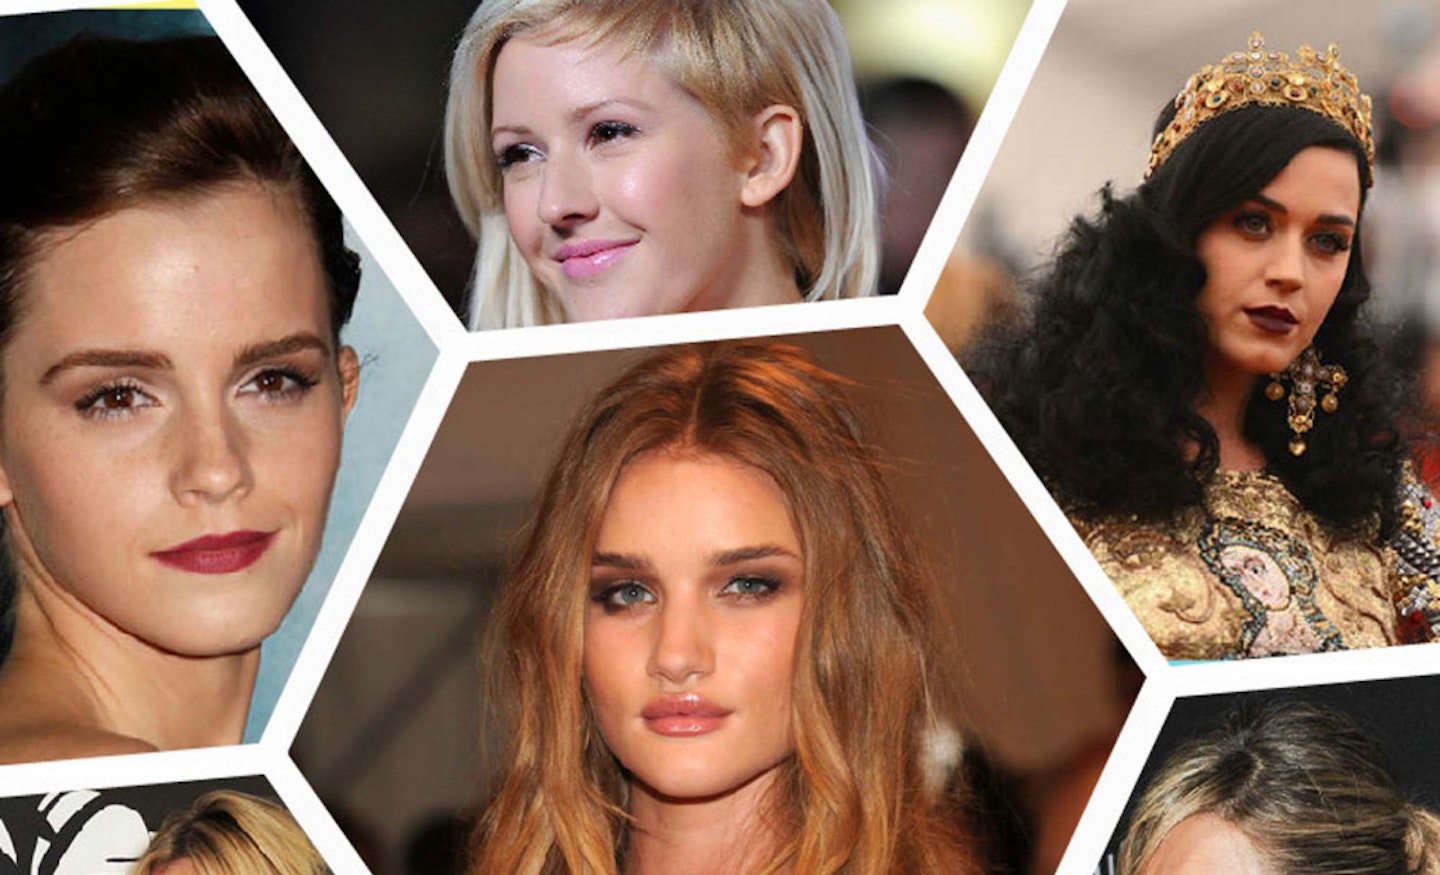 GALLERY >> Beauty Treatments Loved By The Stars